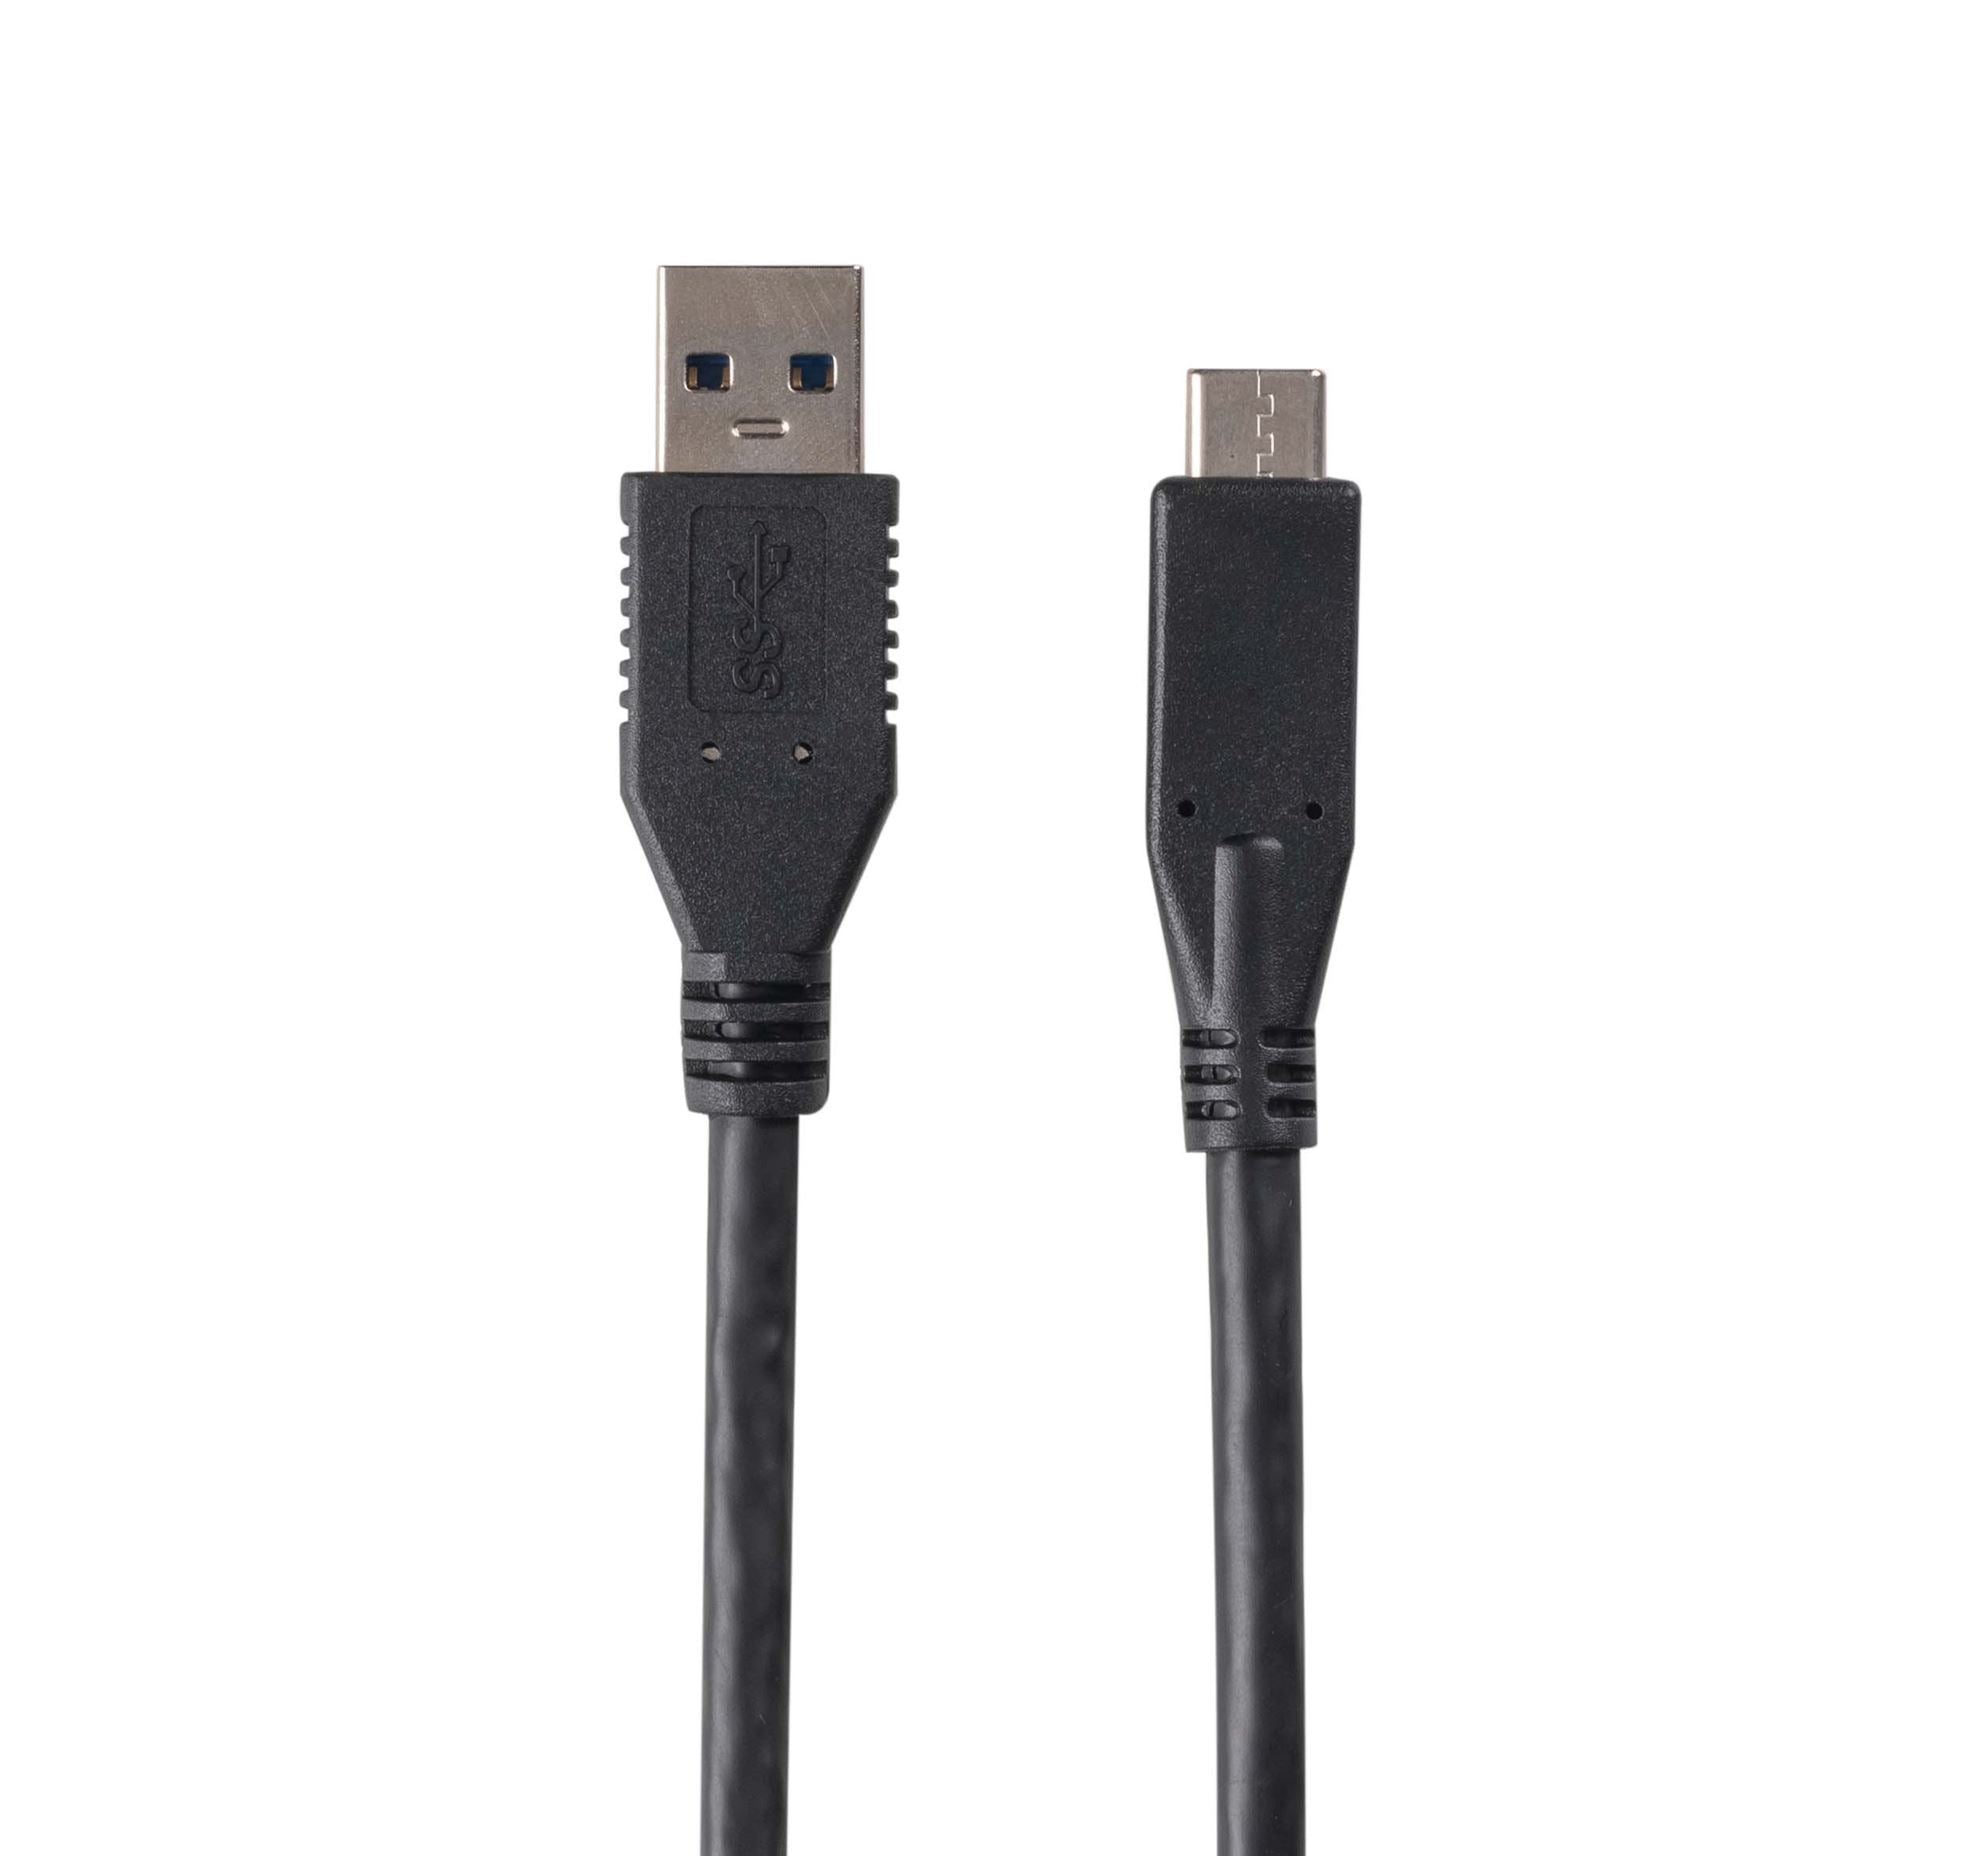 DYNAMIX_0.2M,_USB_3.1_USB-C_Male_to_USB-A_Male_Cable._Black_Colour._Up_to_10G_Data_Transfer_Speed,_Supports_3A_Current. 1132